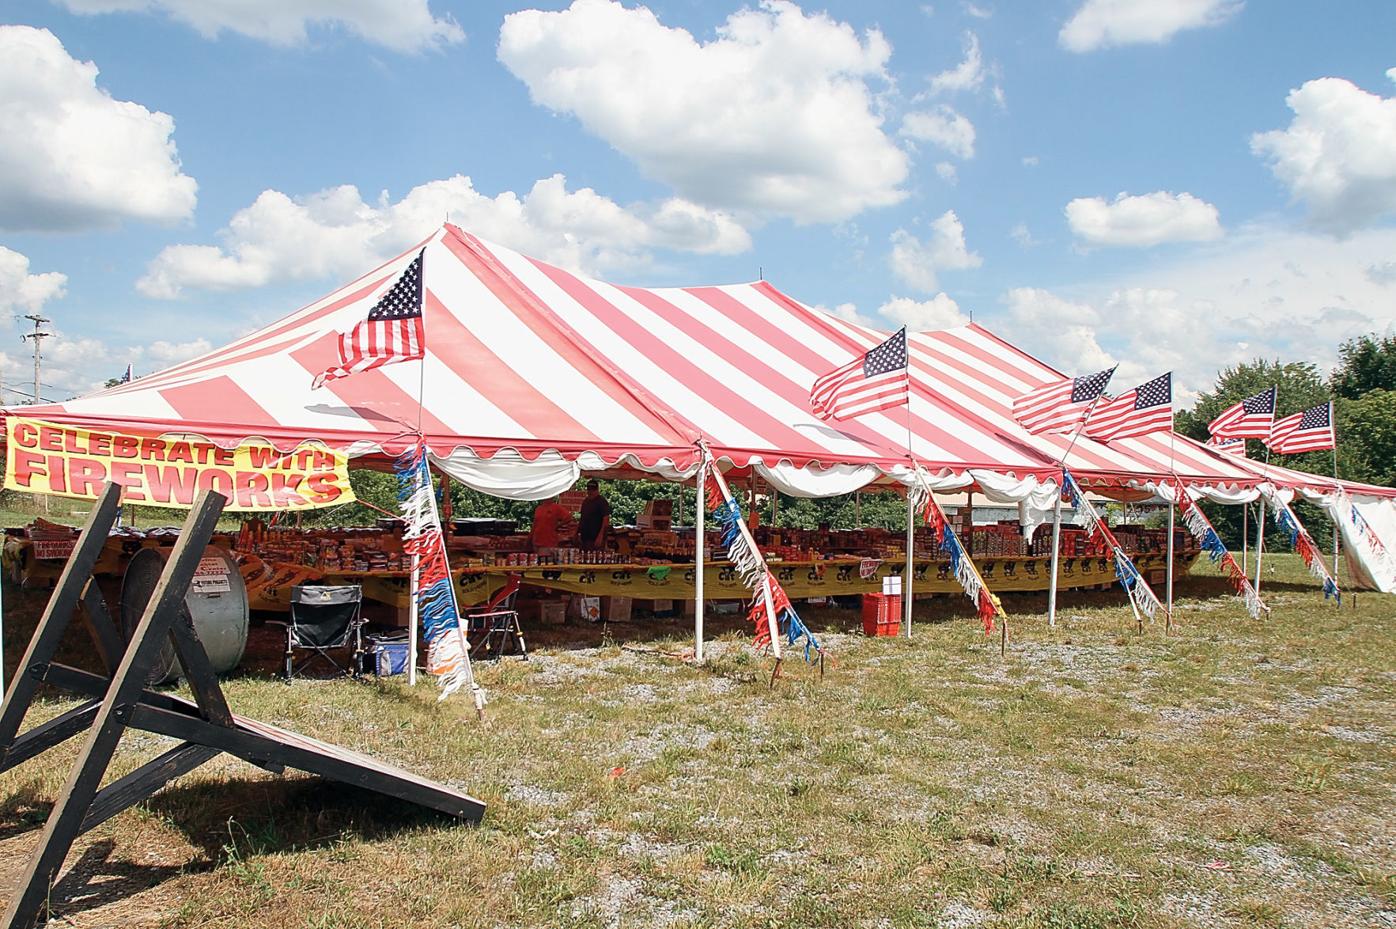 With fireworks sales in full swing, city government reminds residents